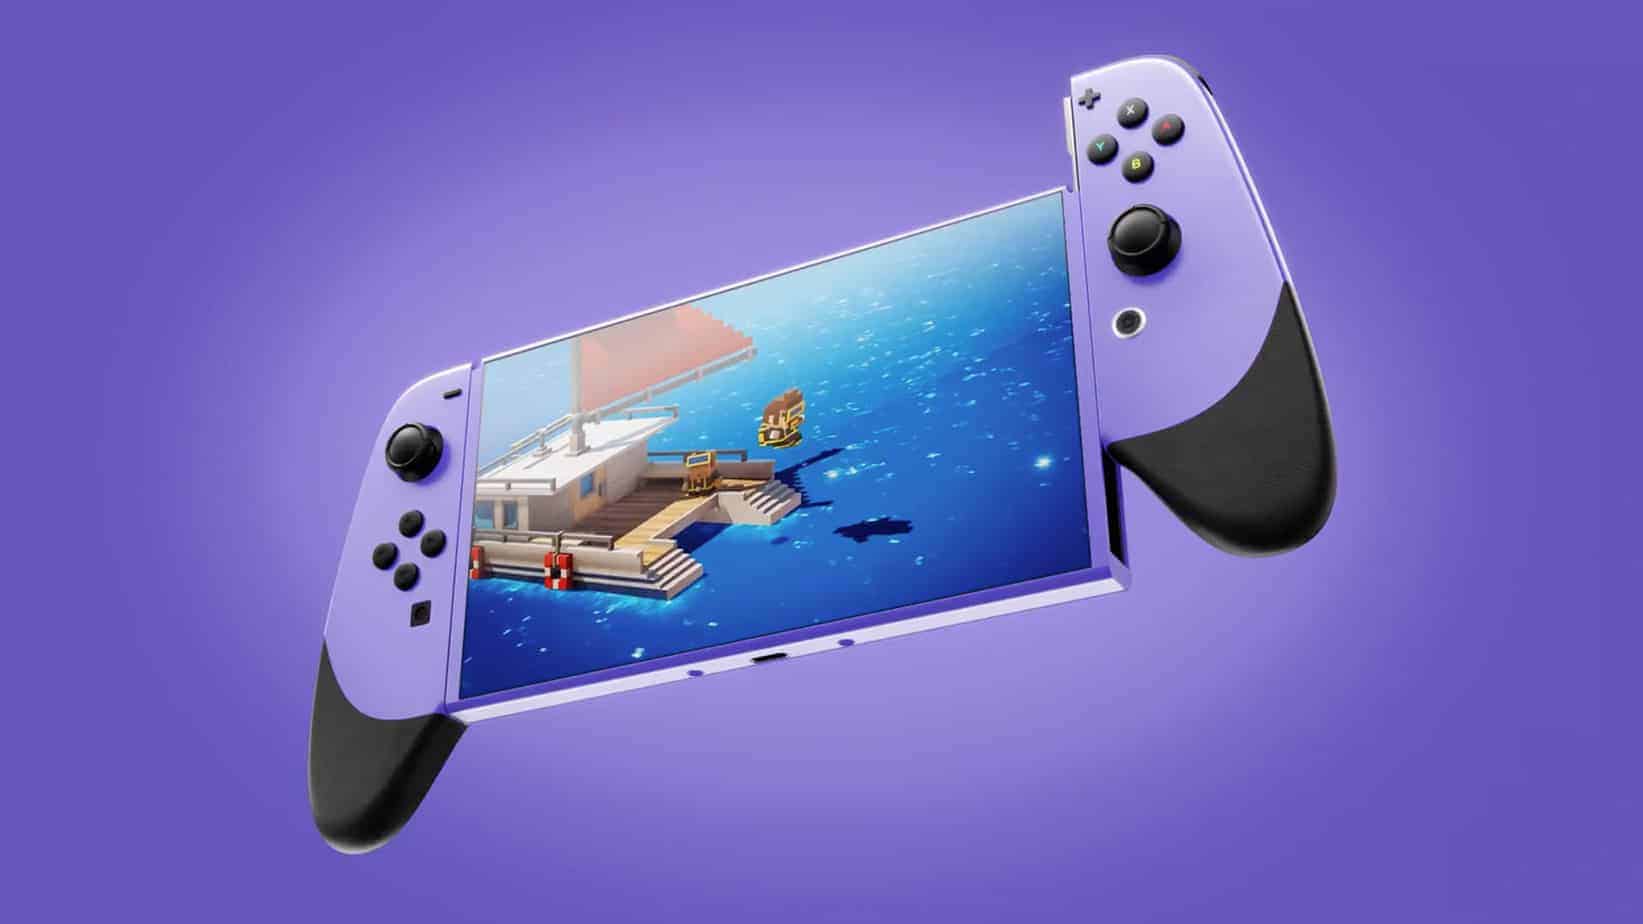 Will the Switch Pro be released in early 2023? Here is the answer